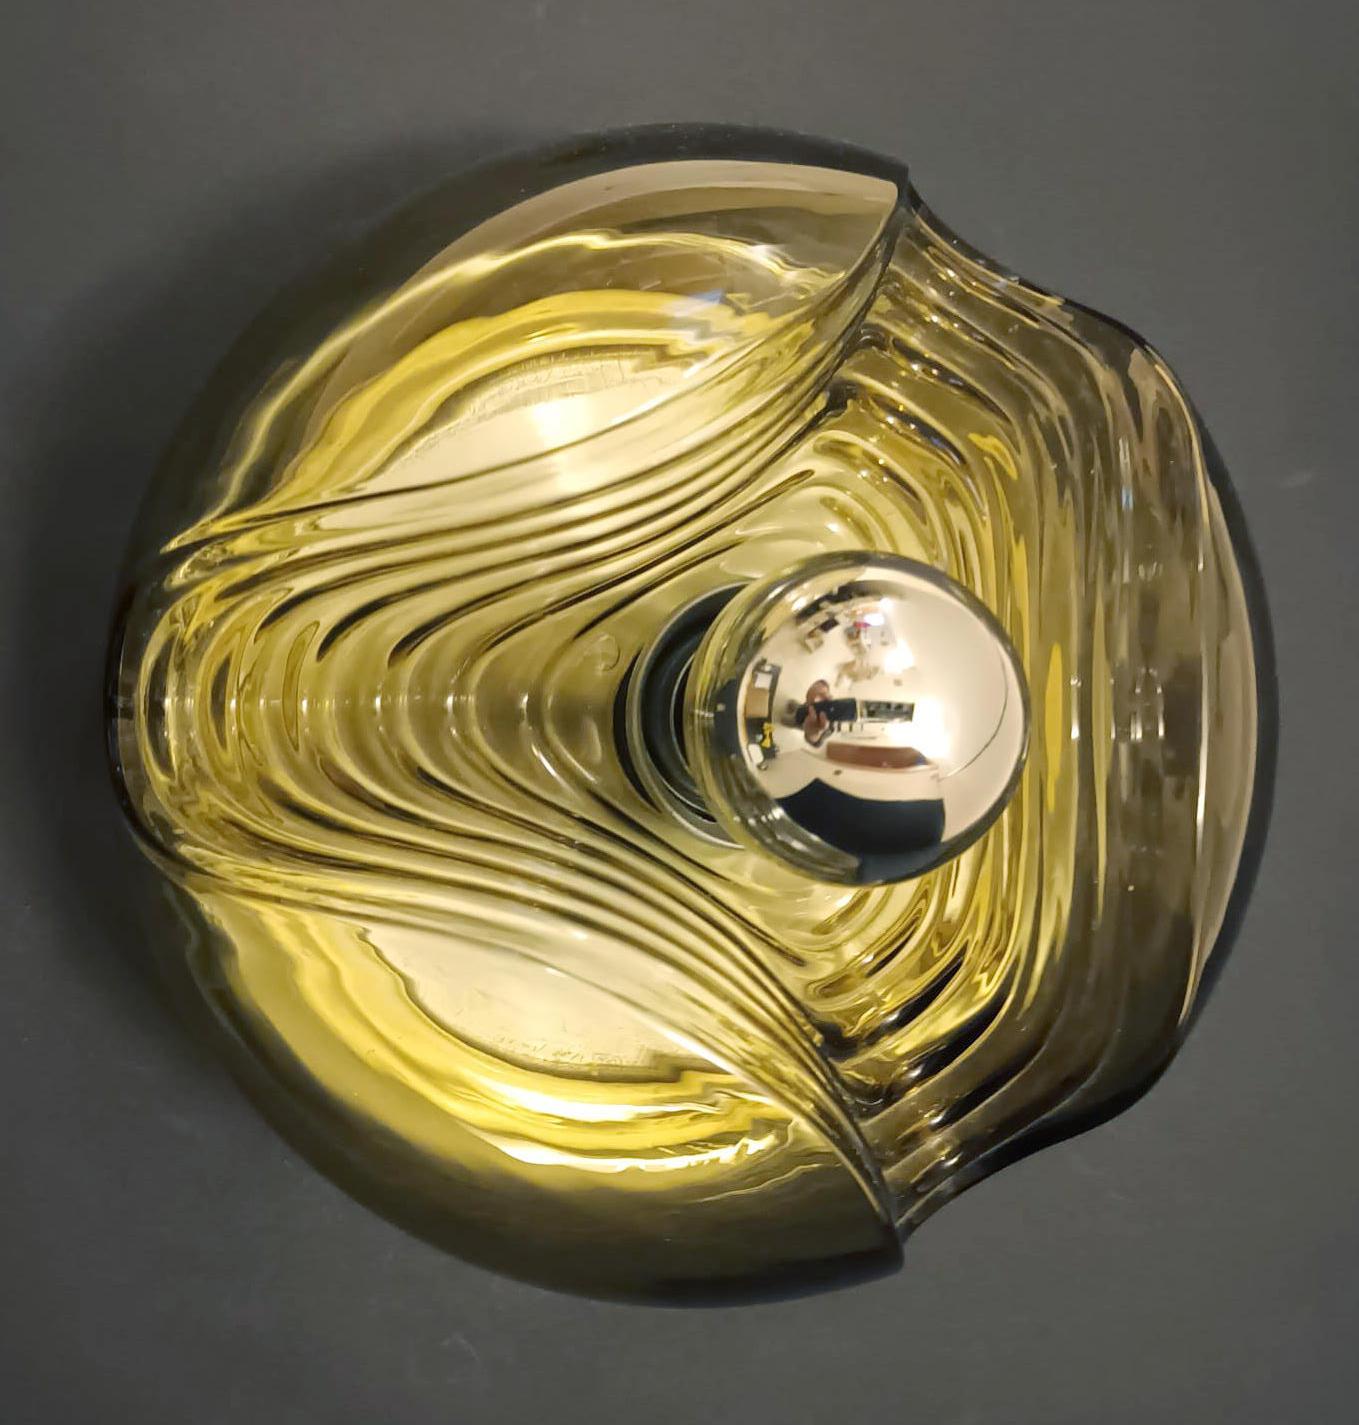 Vintage Italian wall lights with textured smoky Murano glass diffusers / Made in Italy, circa 1960s
Measures: diameter 10 inches, depth 6 inches
1 light / E26 or E27 type / max 60W
1 pair available in stock in Italy
Order reference #: FABIOLTD